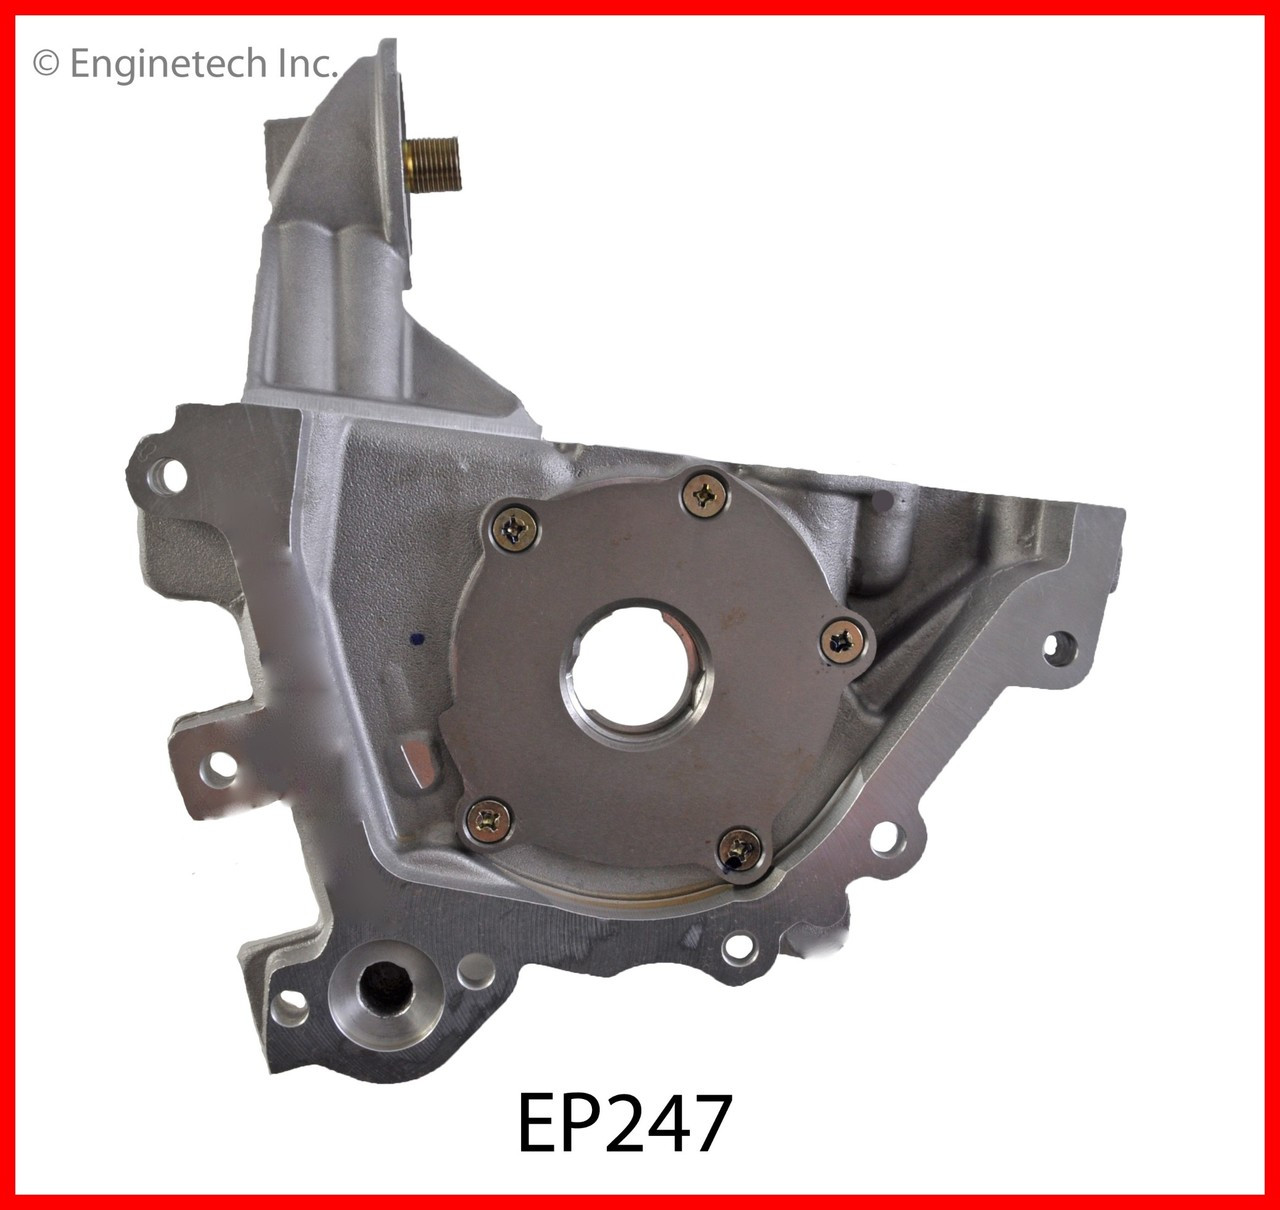 Oil Pump - 1997 Plymouth Voyager 2.4L (EP247.A6)